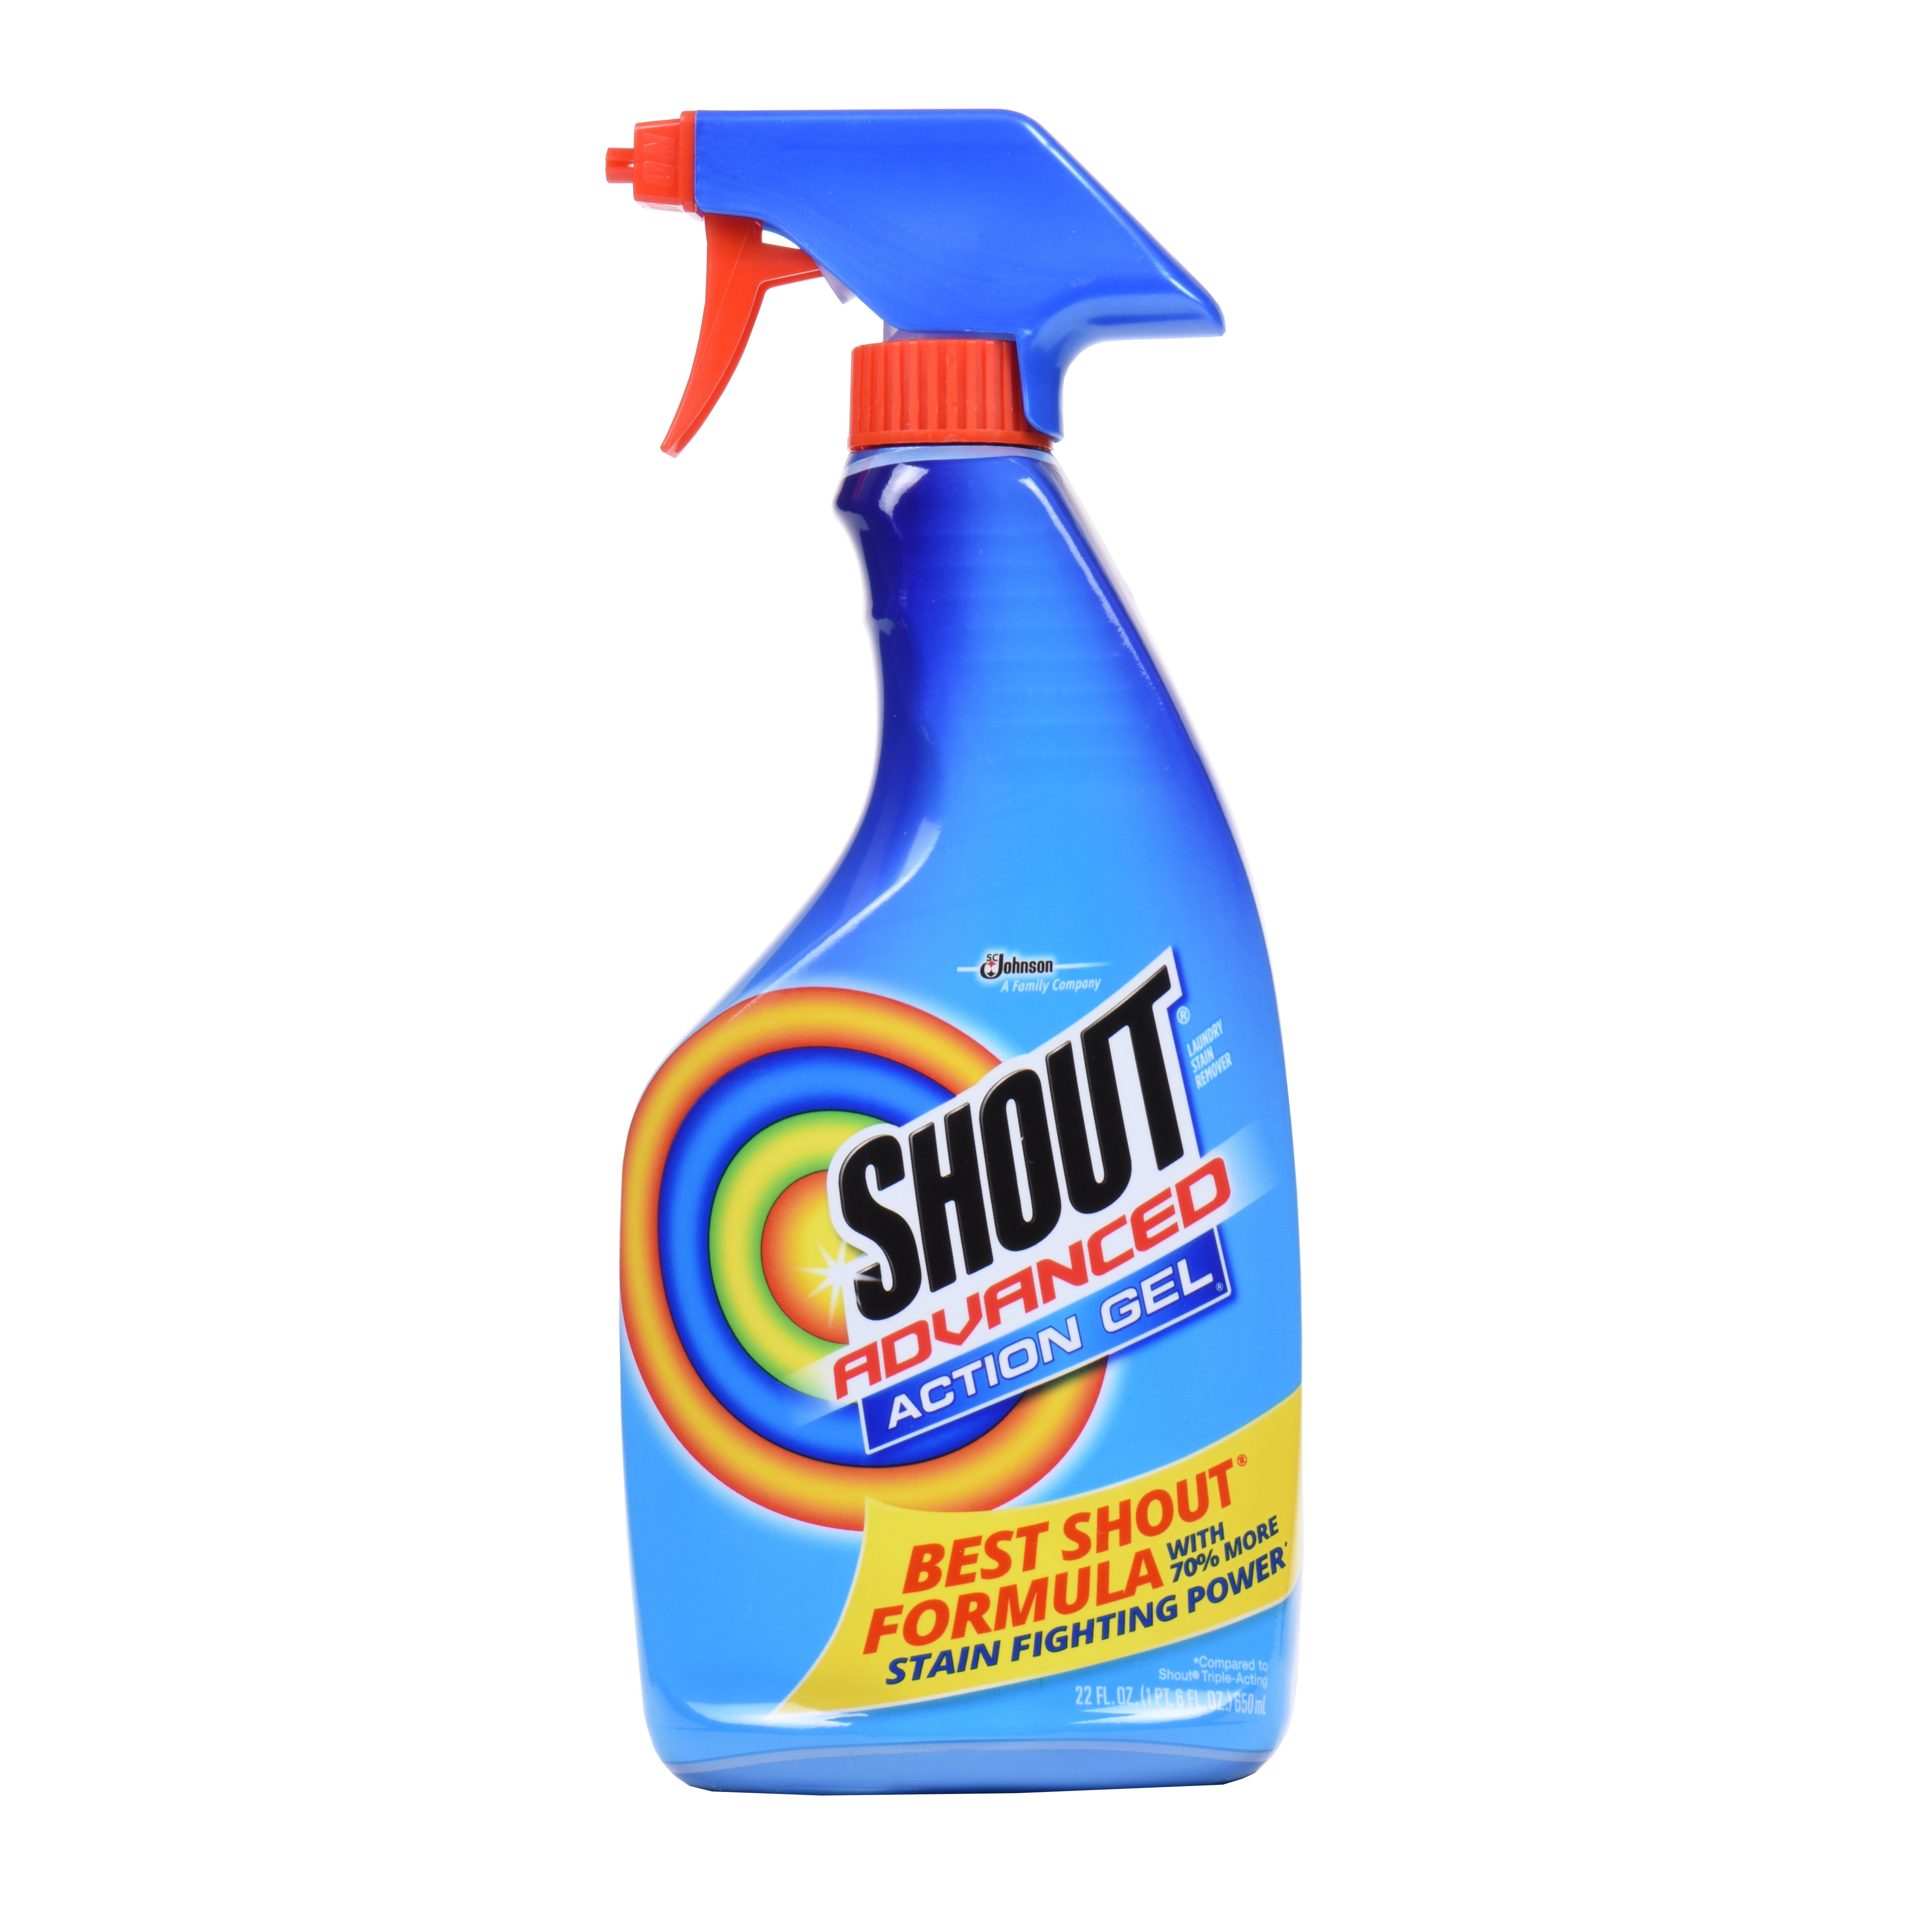 laundry stain remover